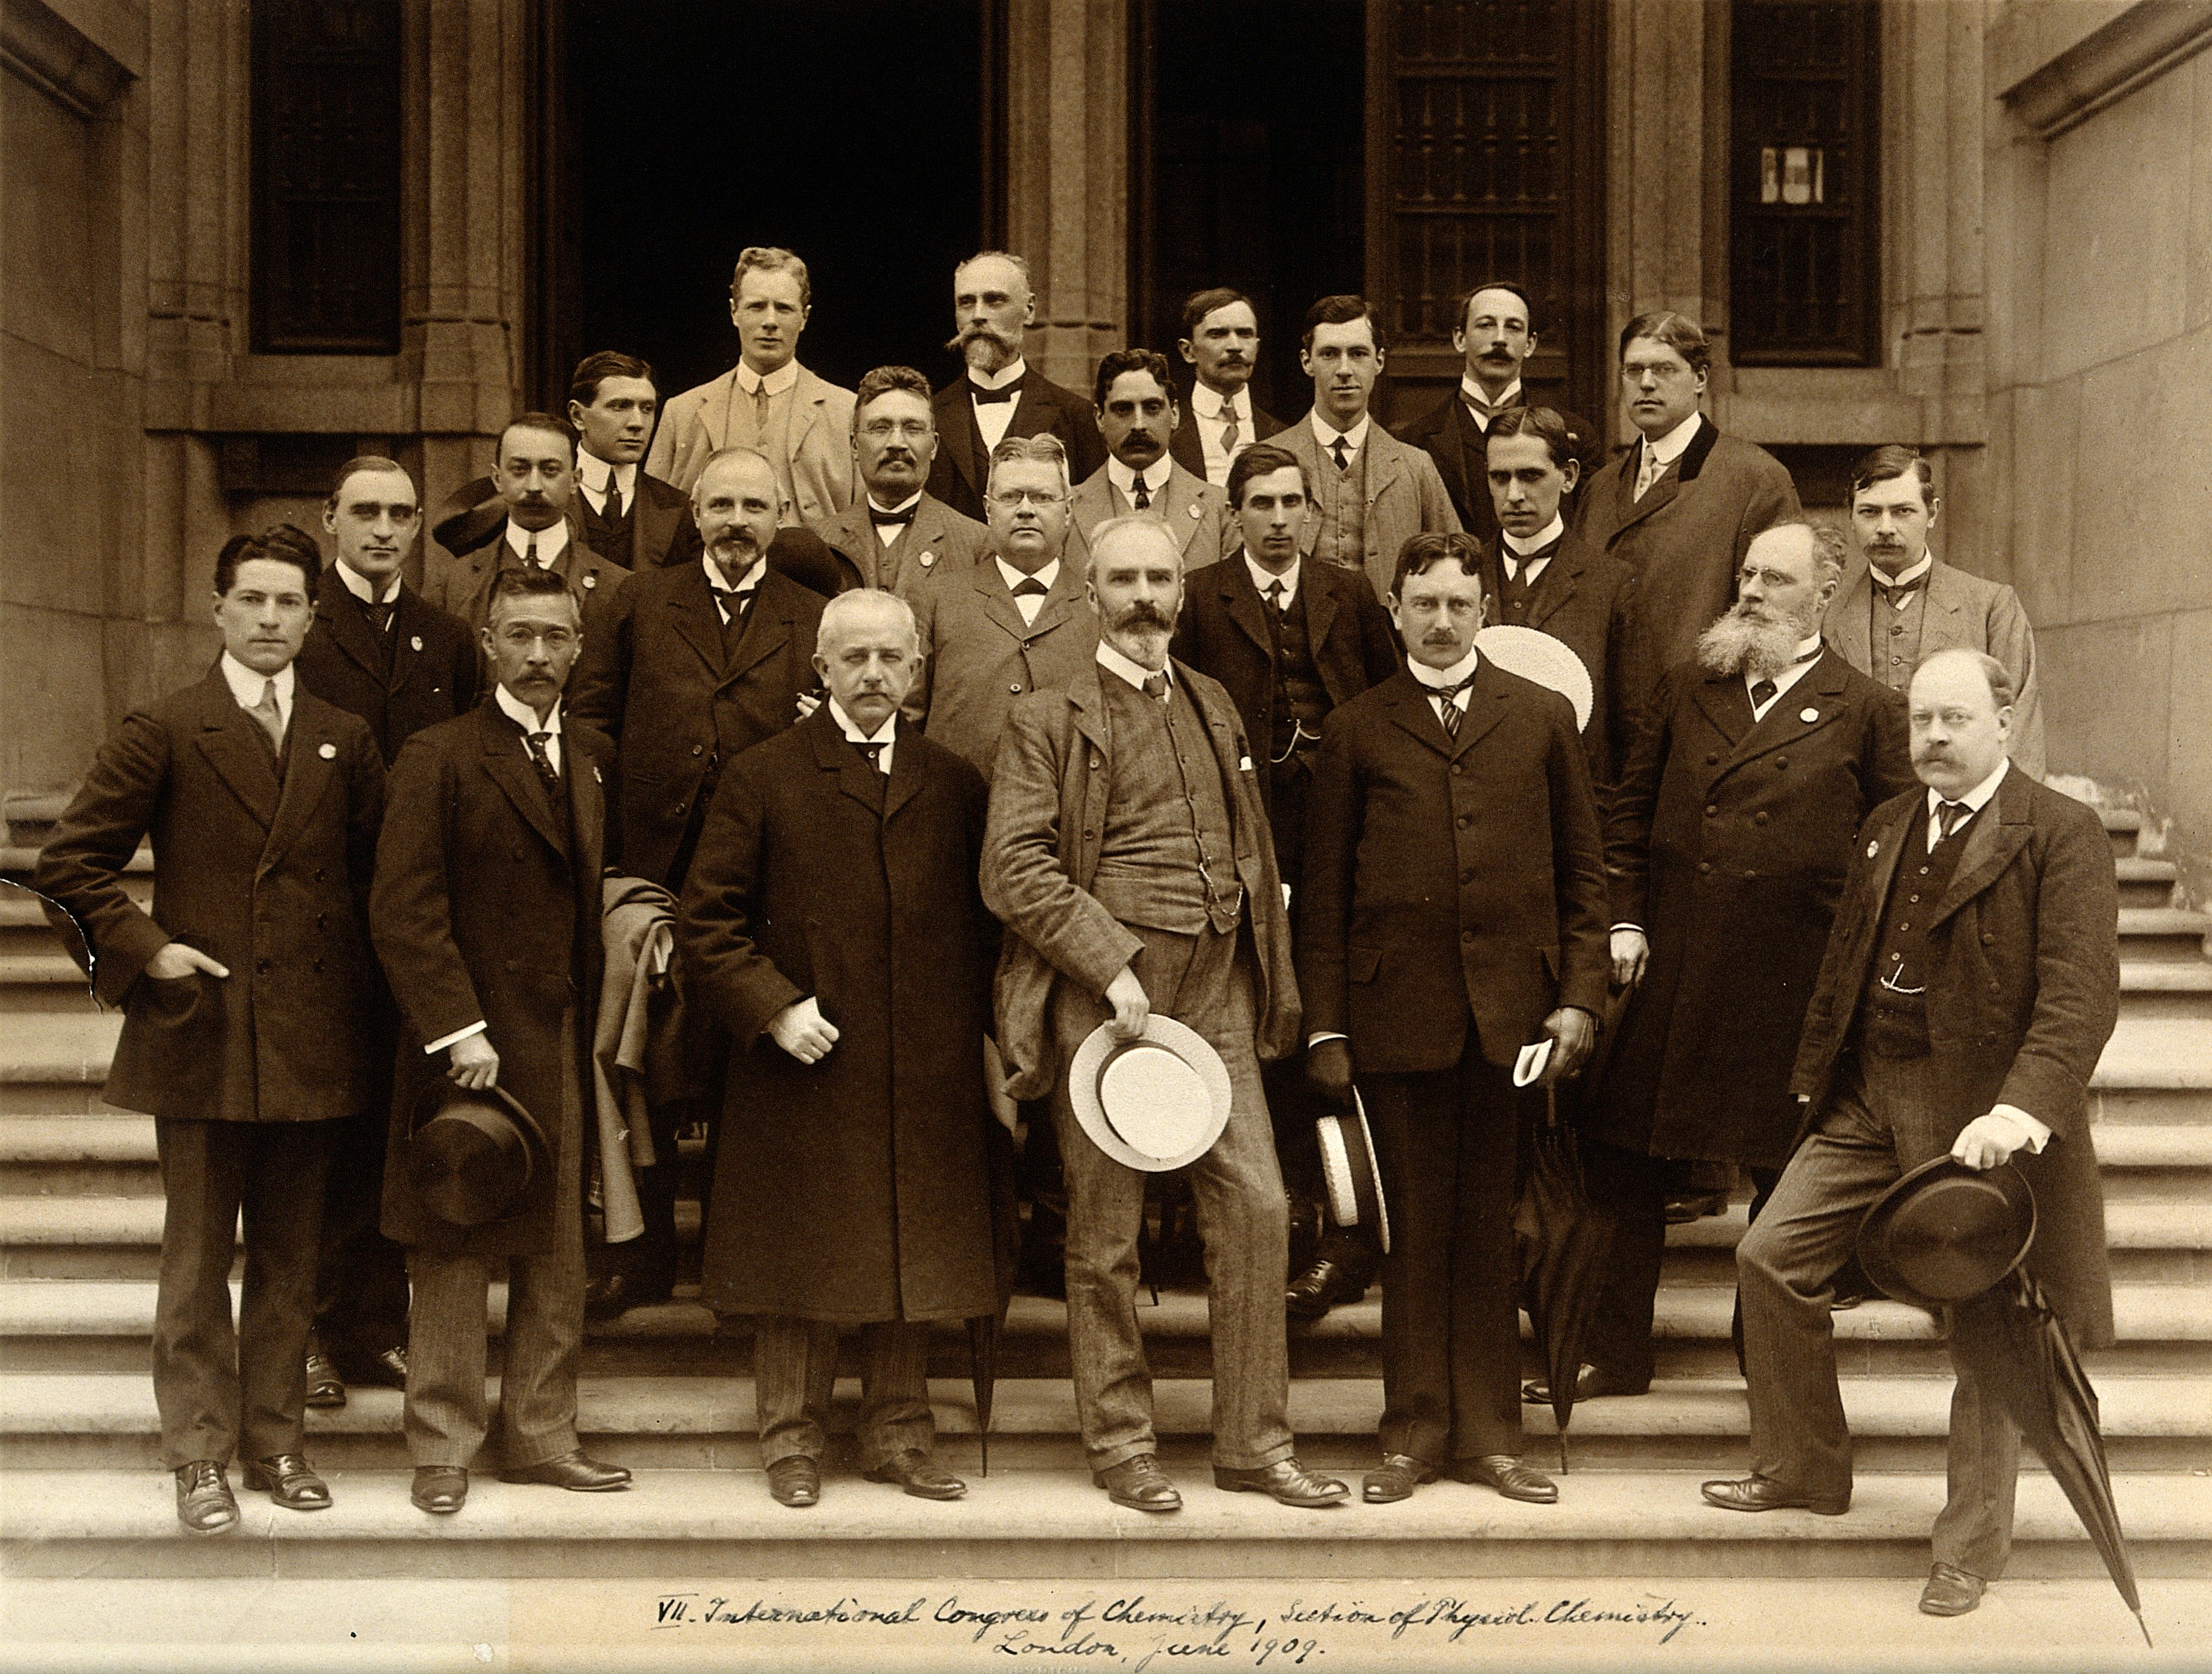 Members of the VII. International Congress of Chemistry, Sec Wellcome V0026251